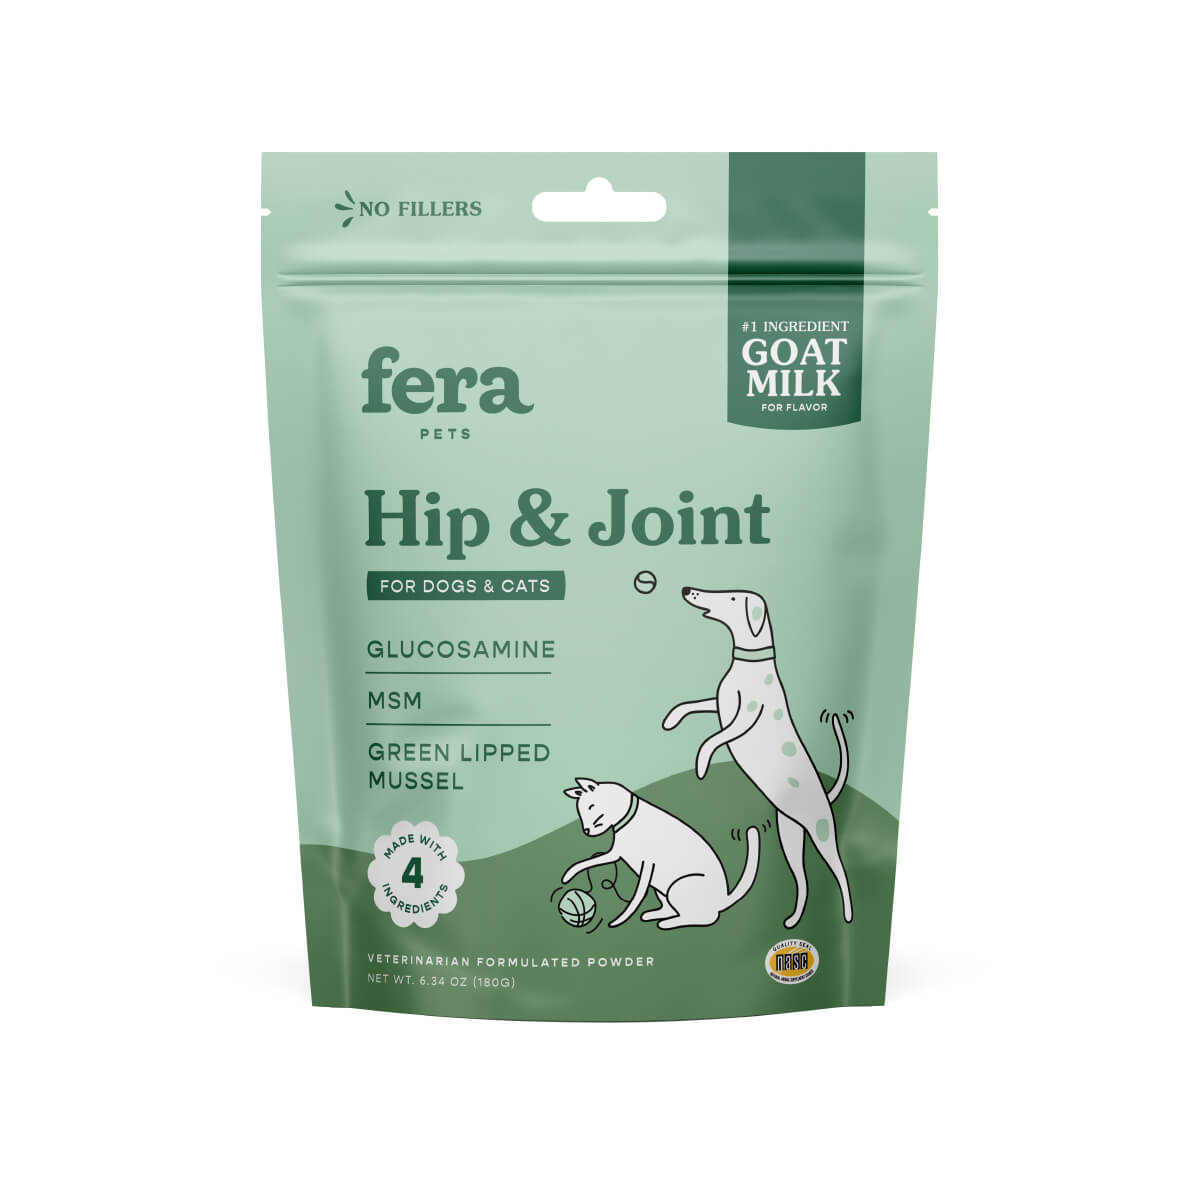 Fera Pets Hip & Joint Goat Milk Topper For Dogs & Cats